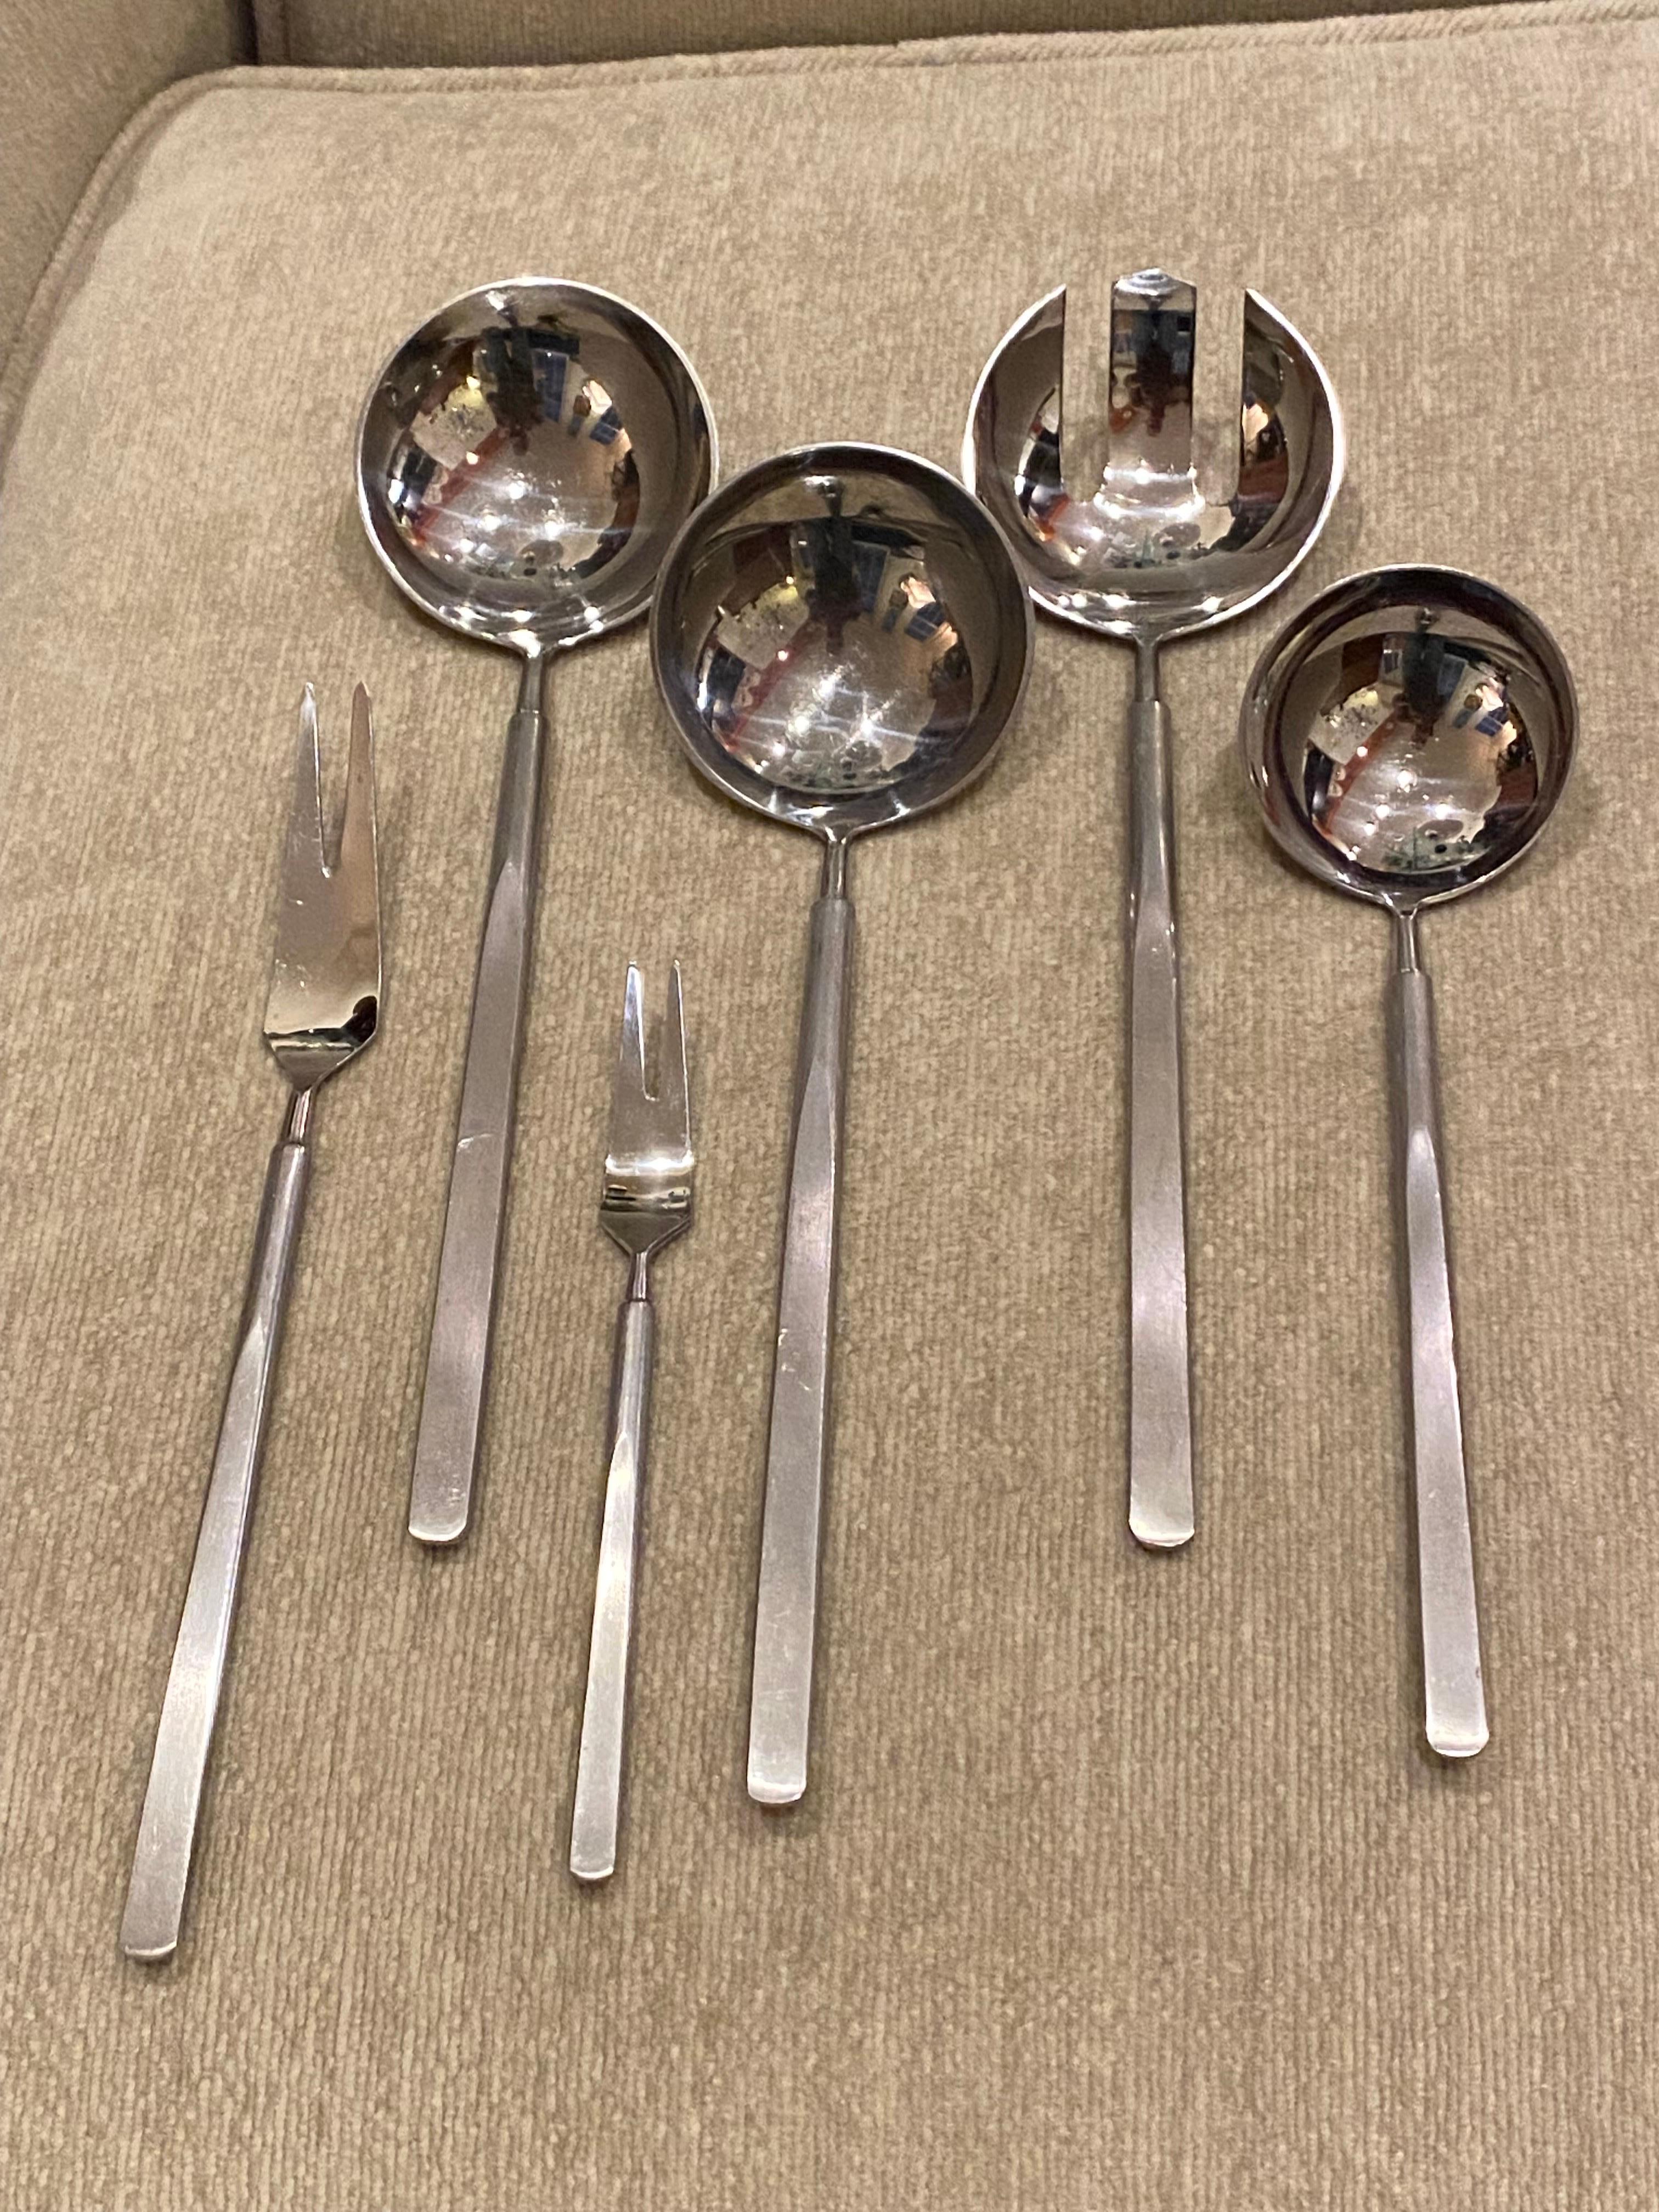 Erik Herlow for Copenhagen Cutlery, massive Stainless Steel Flatware Set.  7 piece place setting for 12!  Plus 10 Butter knives and 6 Large Serving Pieces.  Very Clean Set,  was not a daily use set so very nice original condition!